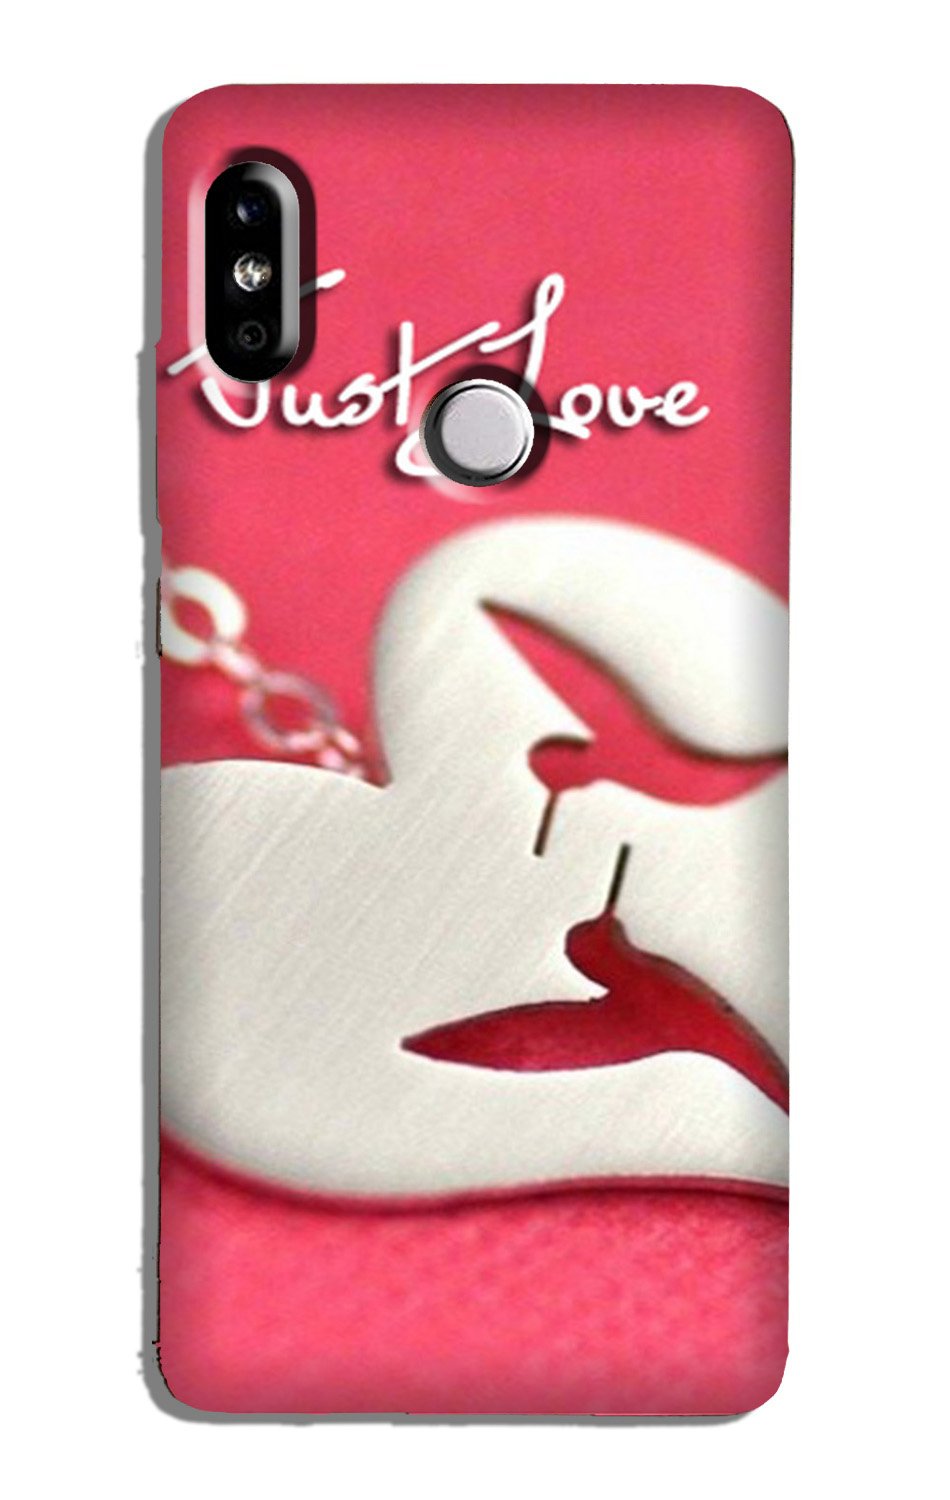 Just love Case for Redmi Note 5 Pro